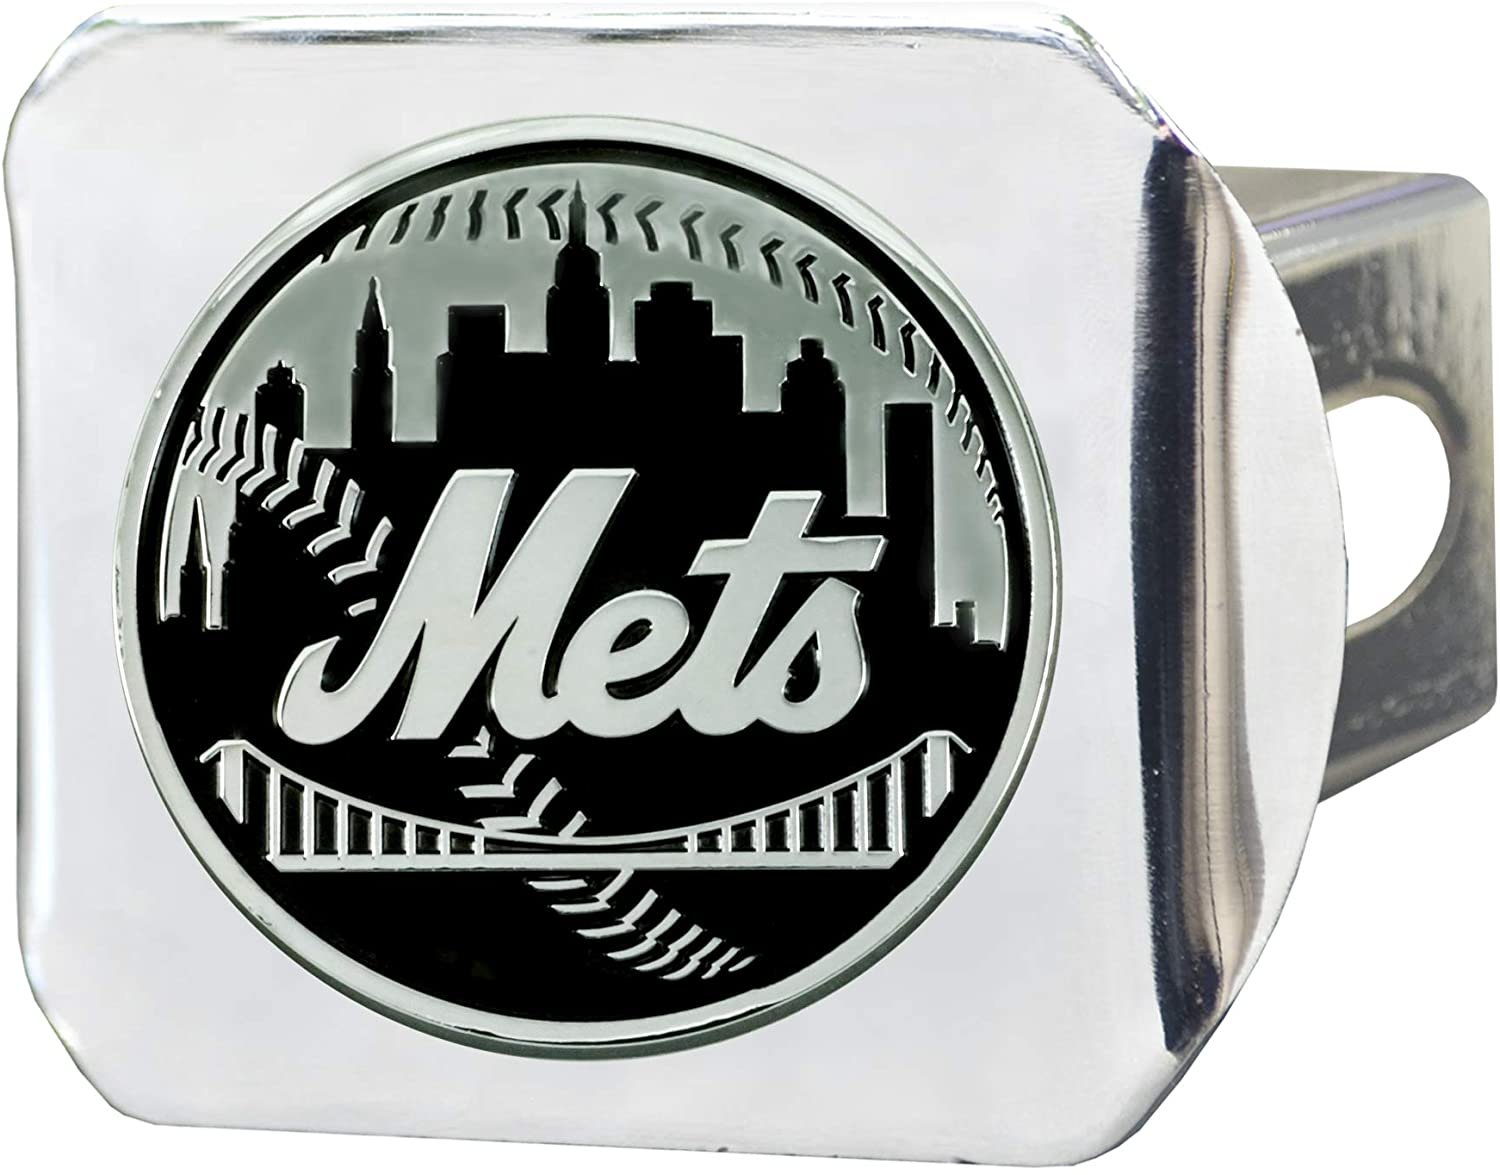 New York Mets Hitch Cover Solid Metal with Raised Chrome Metal Emblem 2" Square Type III